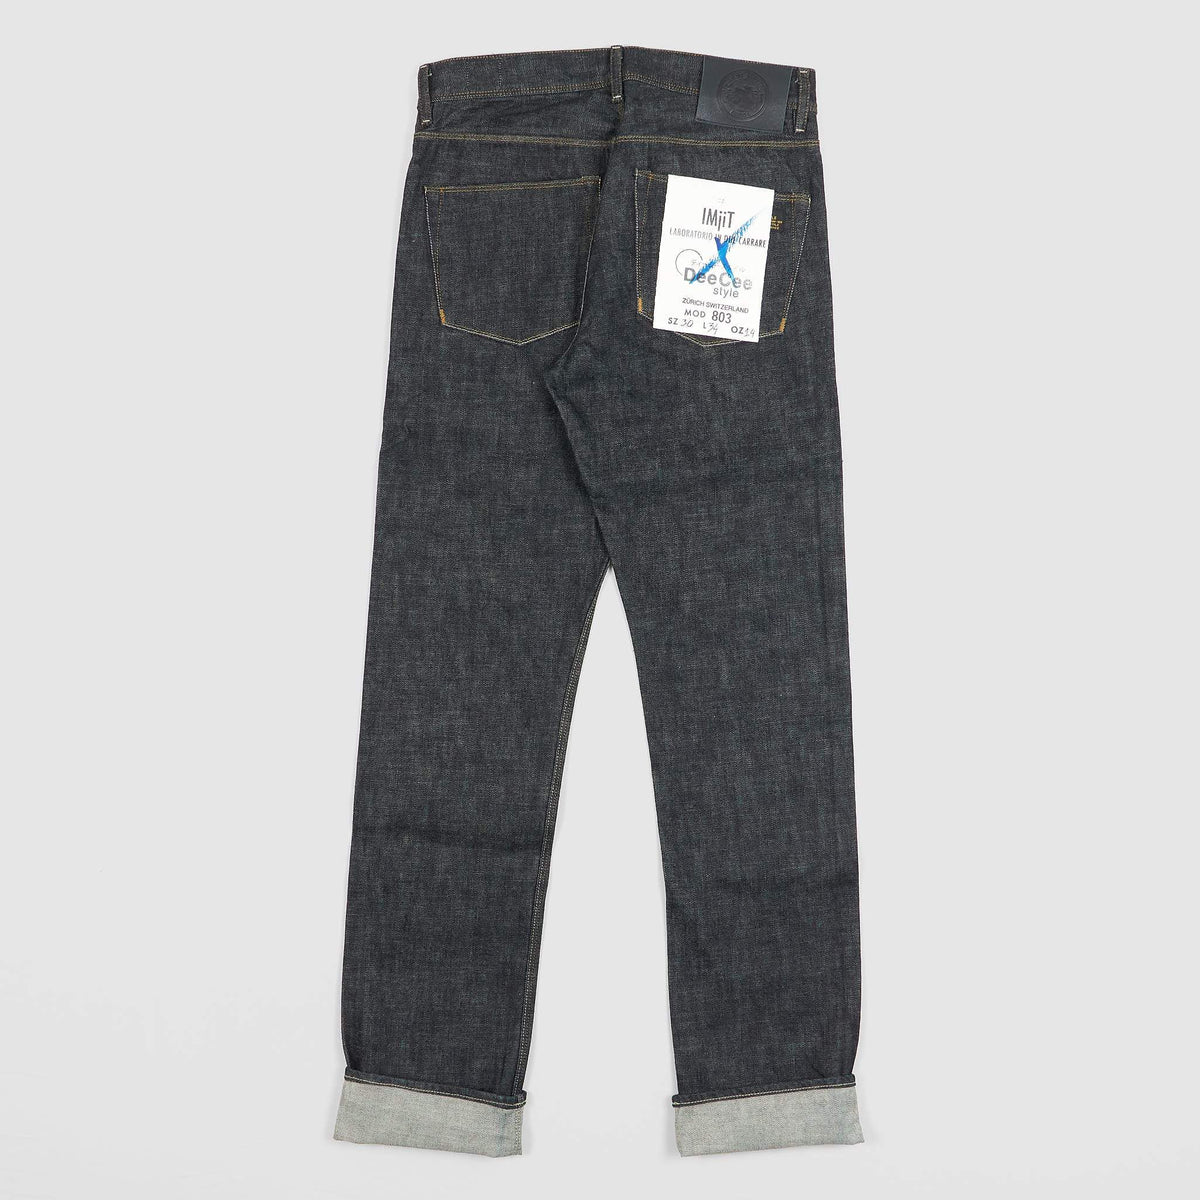 IMjiT x DeeCee style Regular Tapered Selvage Jeans